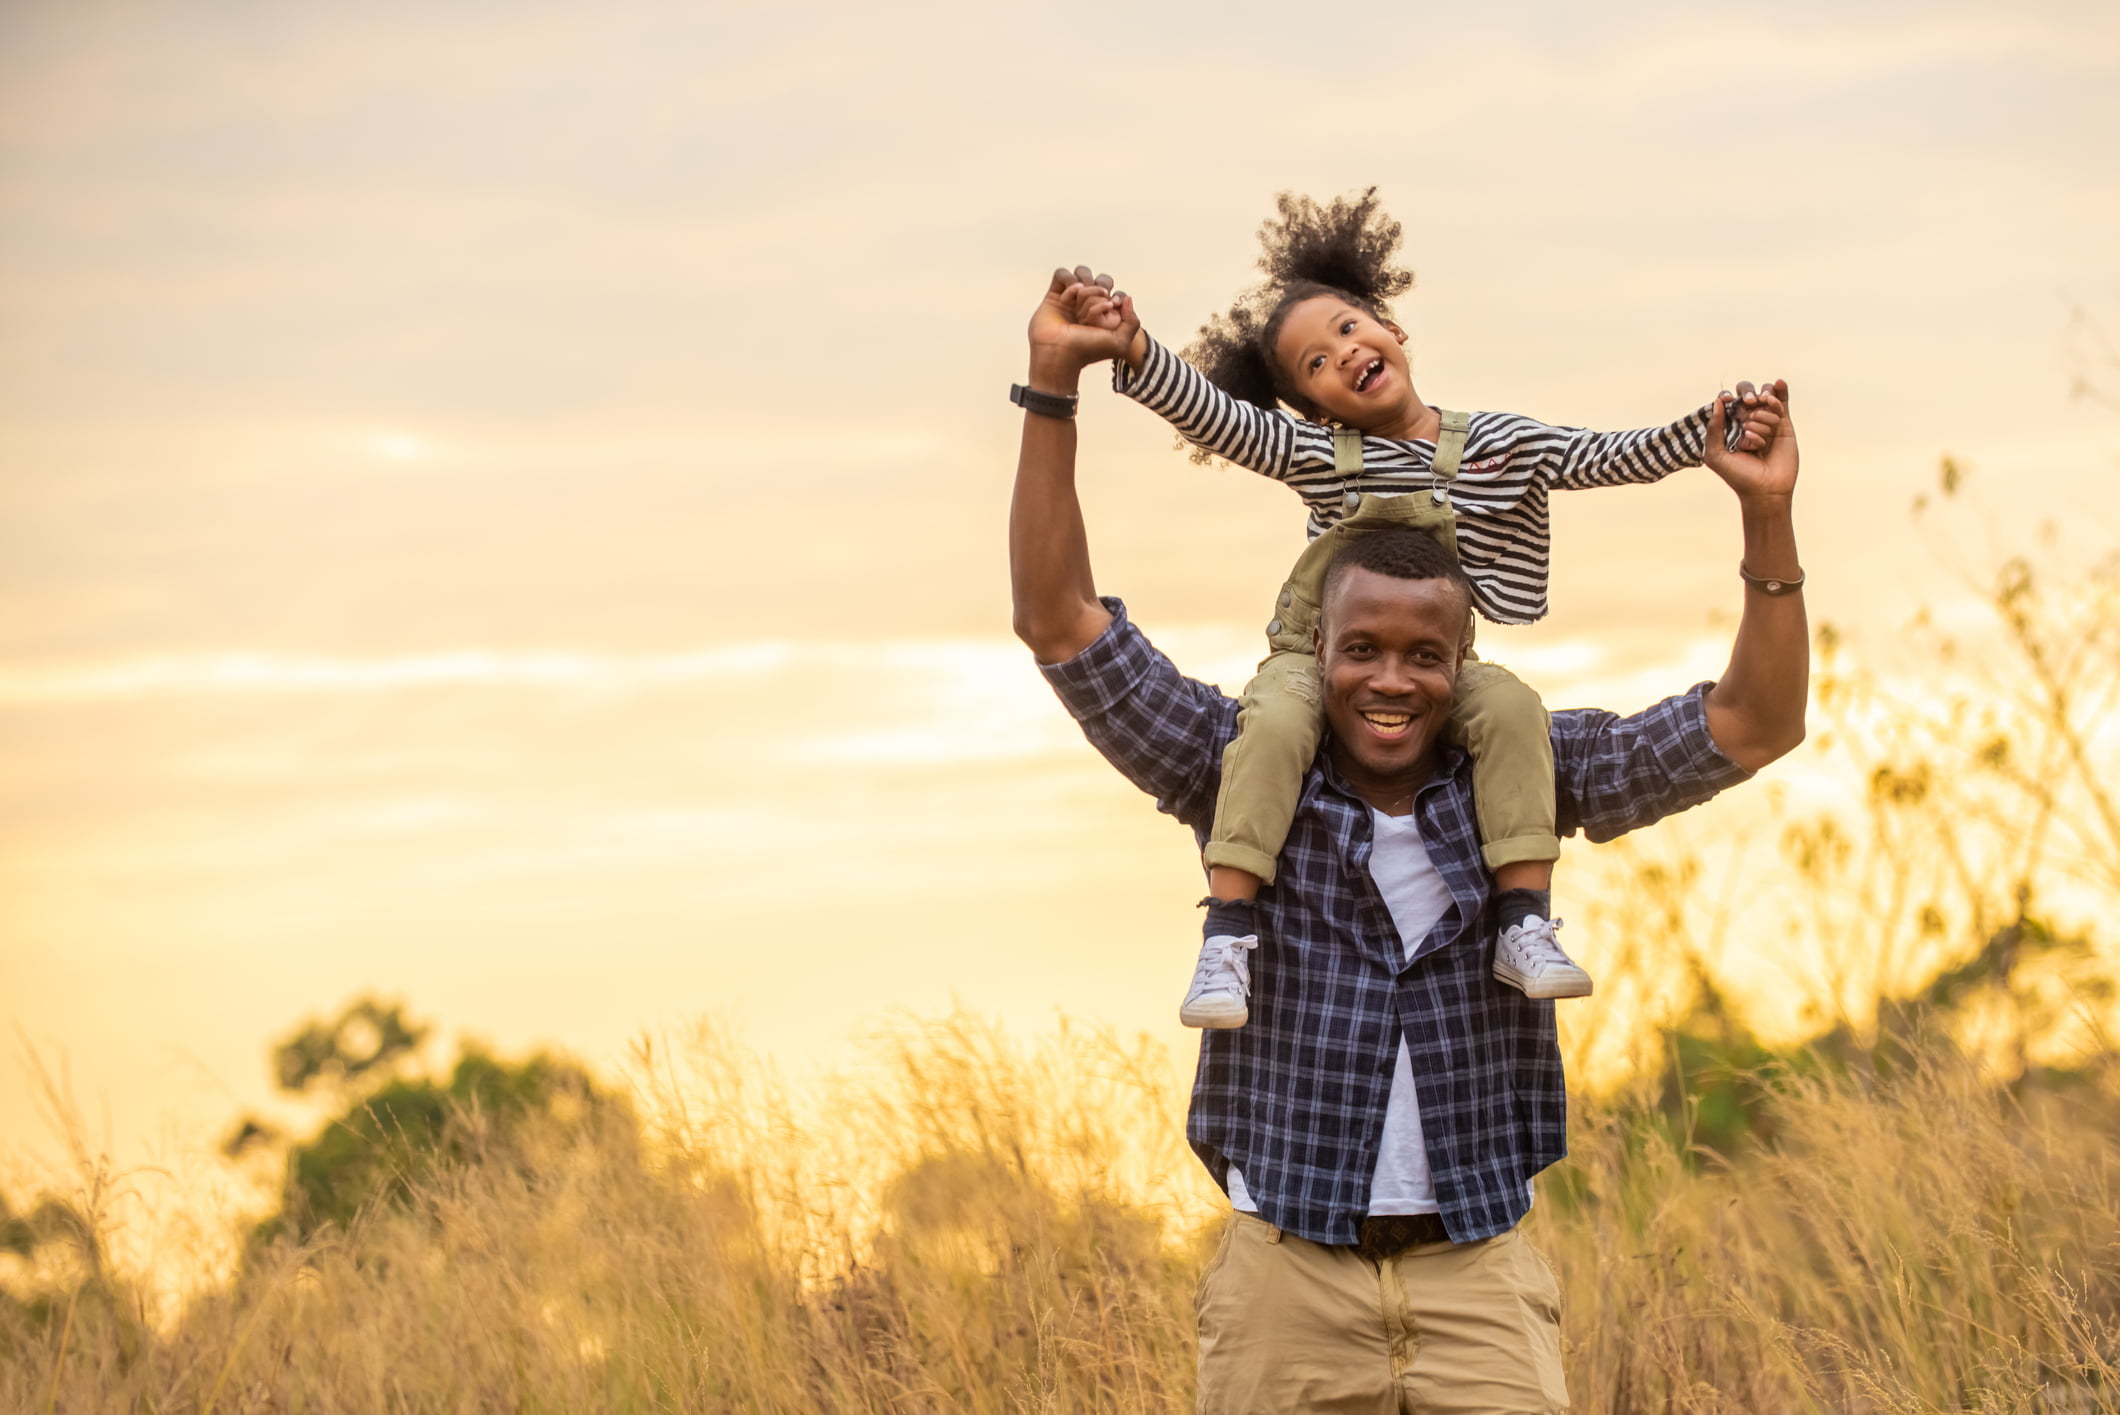 Father and his daughter on his shoulders, playing in a field during the golden hour.